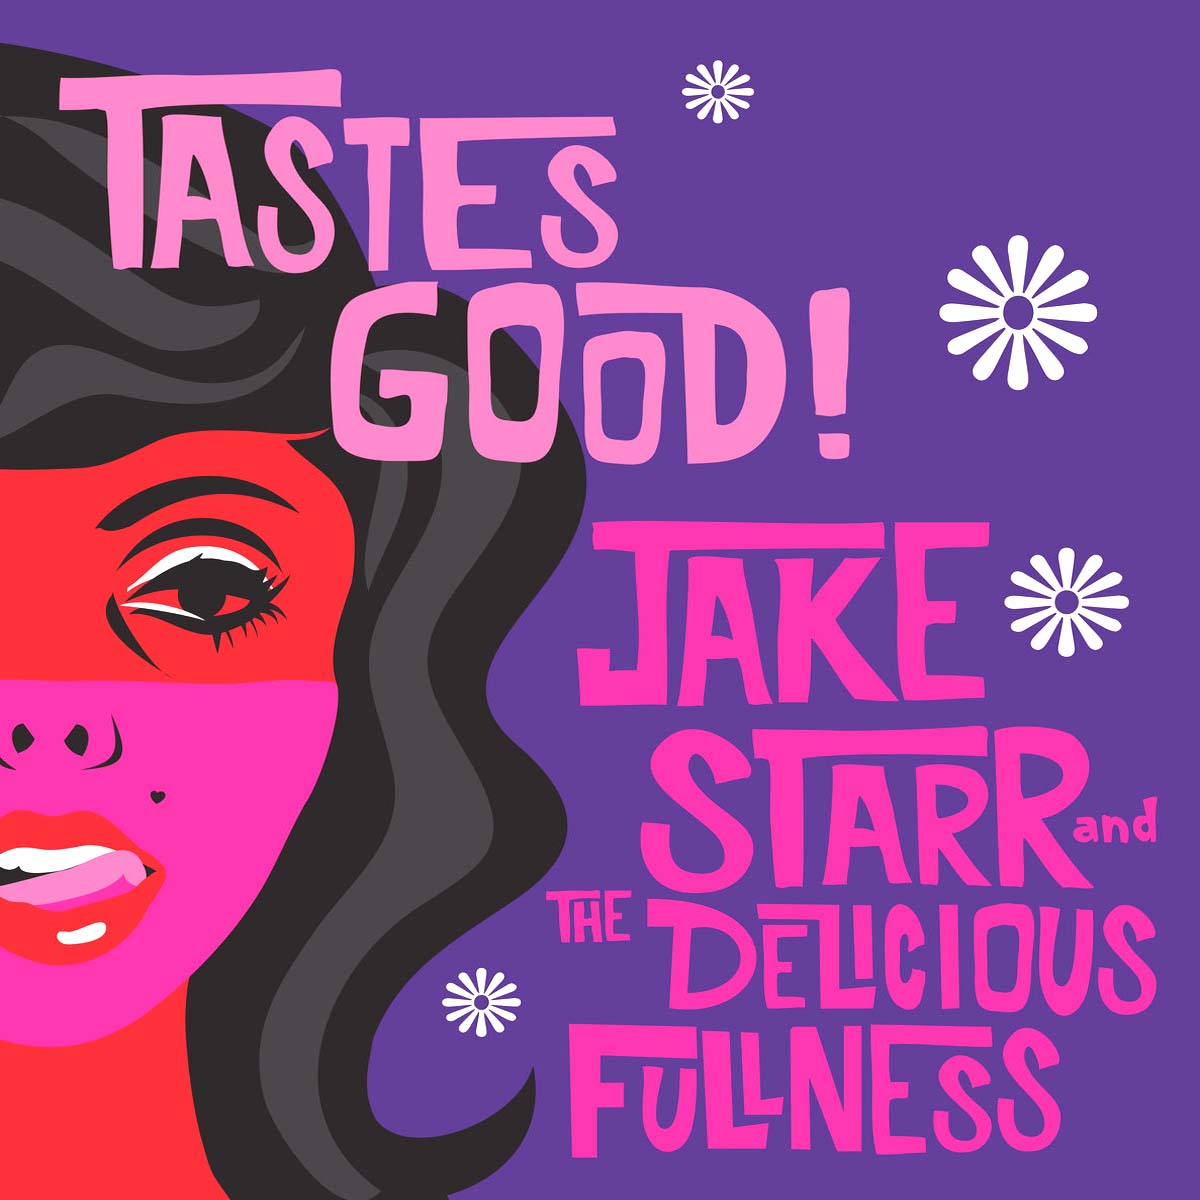 Jake Starr And The Delicious Fullness- Tastes Good LP ~GHOST HIGHWAY REC!